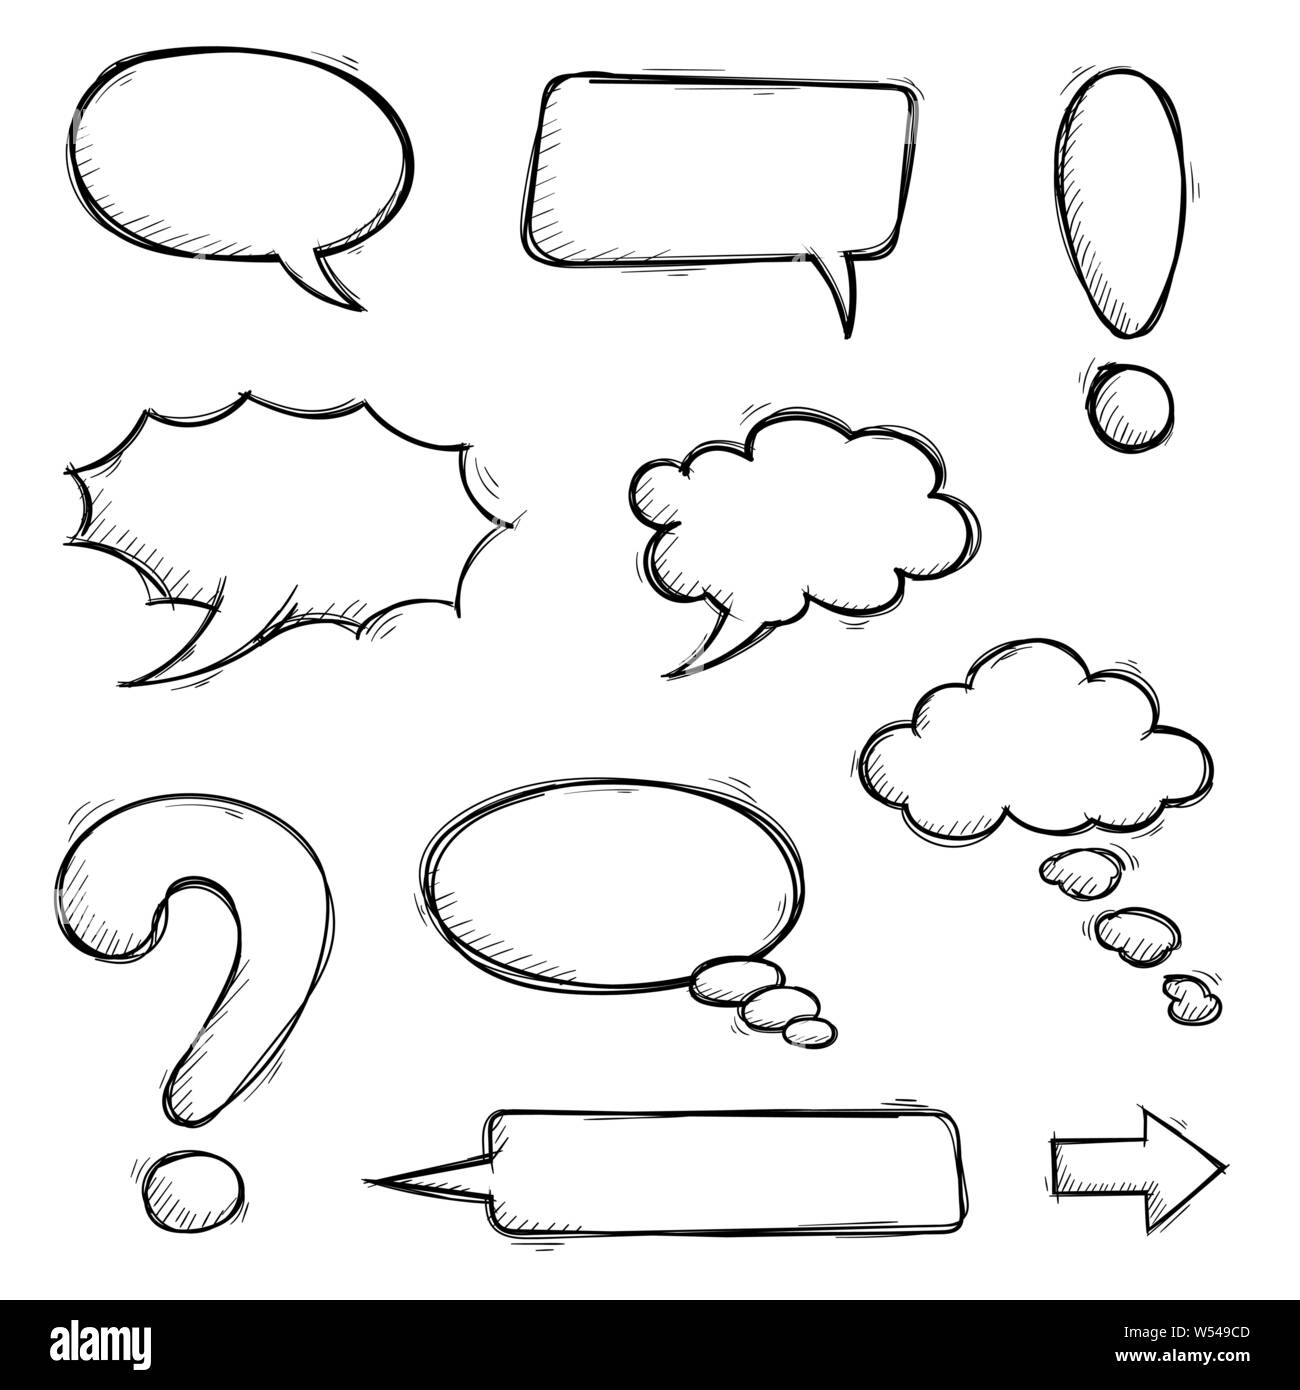 Speech bubbles and punctuation marks. Hand drawn doodle Stock Vector